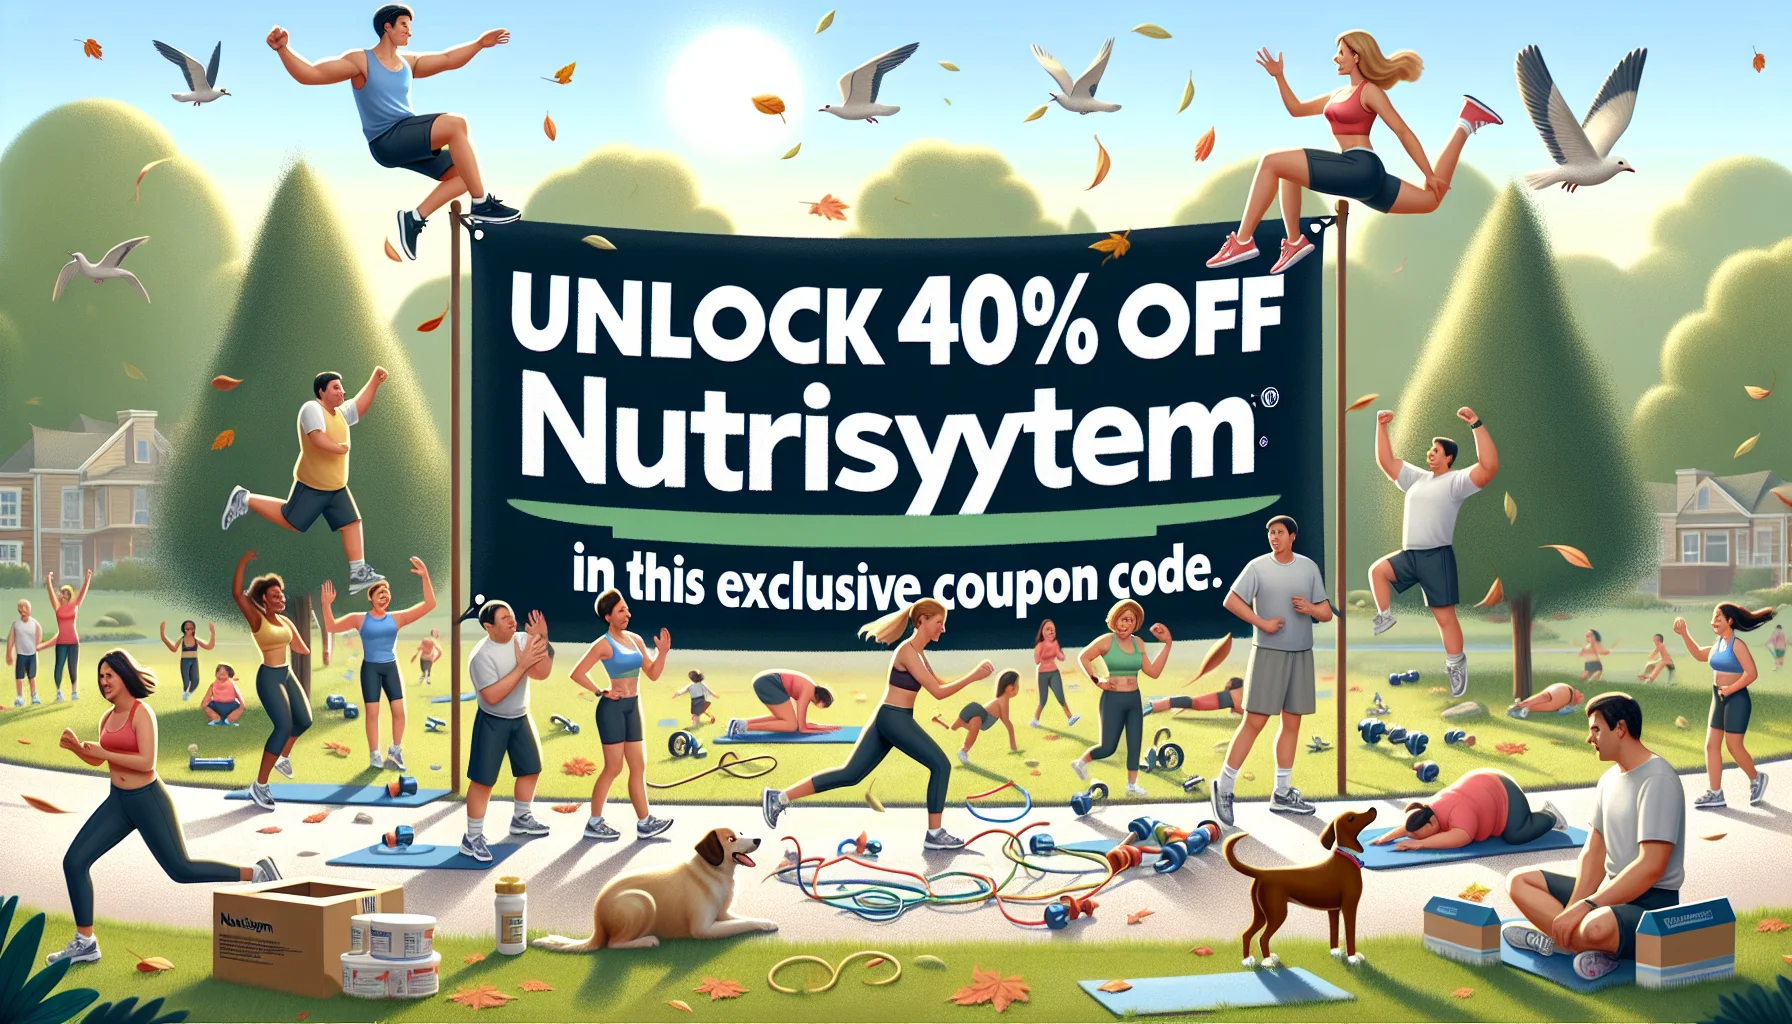 Create a lively, humorous image showcasing a promotional banner that reads 'Unlock 40% Off Nutrisystem with This Exclusive Coupon Code'. The banner is set in a local park, filled with people of various descents and gender, happily engaged in various forms of exercise. Some people are jogging, some are doing yoga, while others are doing push-ups or jumping rope. There's also a dog trying to chase its tail. To emphasize the delightful ambiance, paint a beautiful, clear day with a gentle breeze blowing through the trees and leaves scattering playfully on the ground.